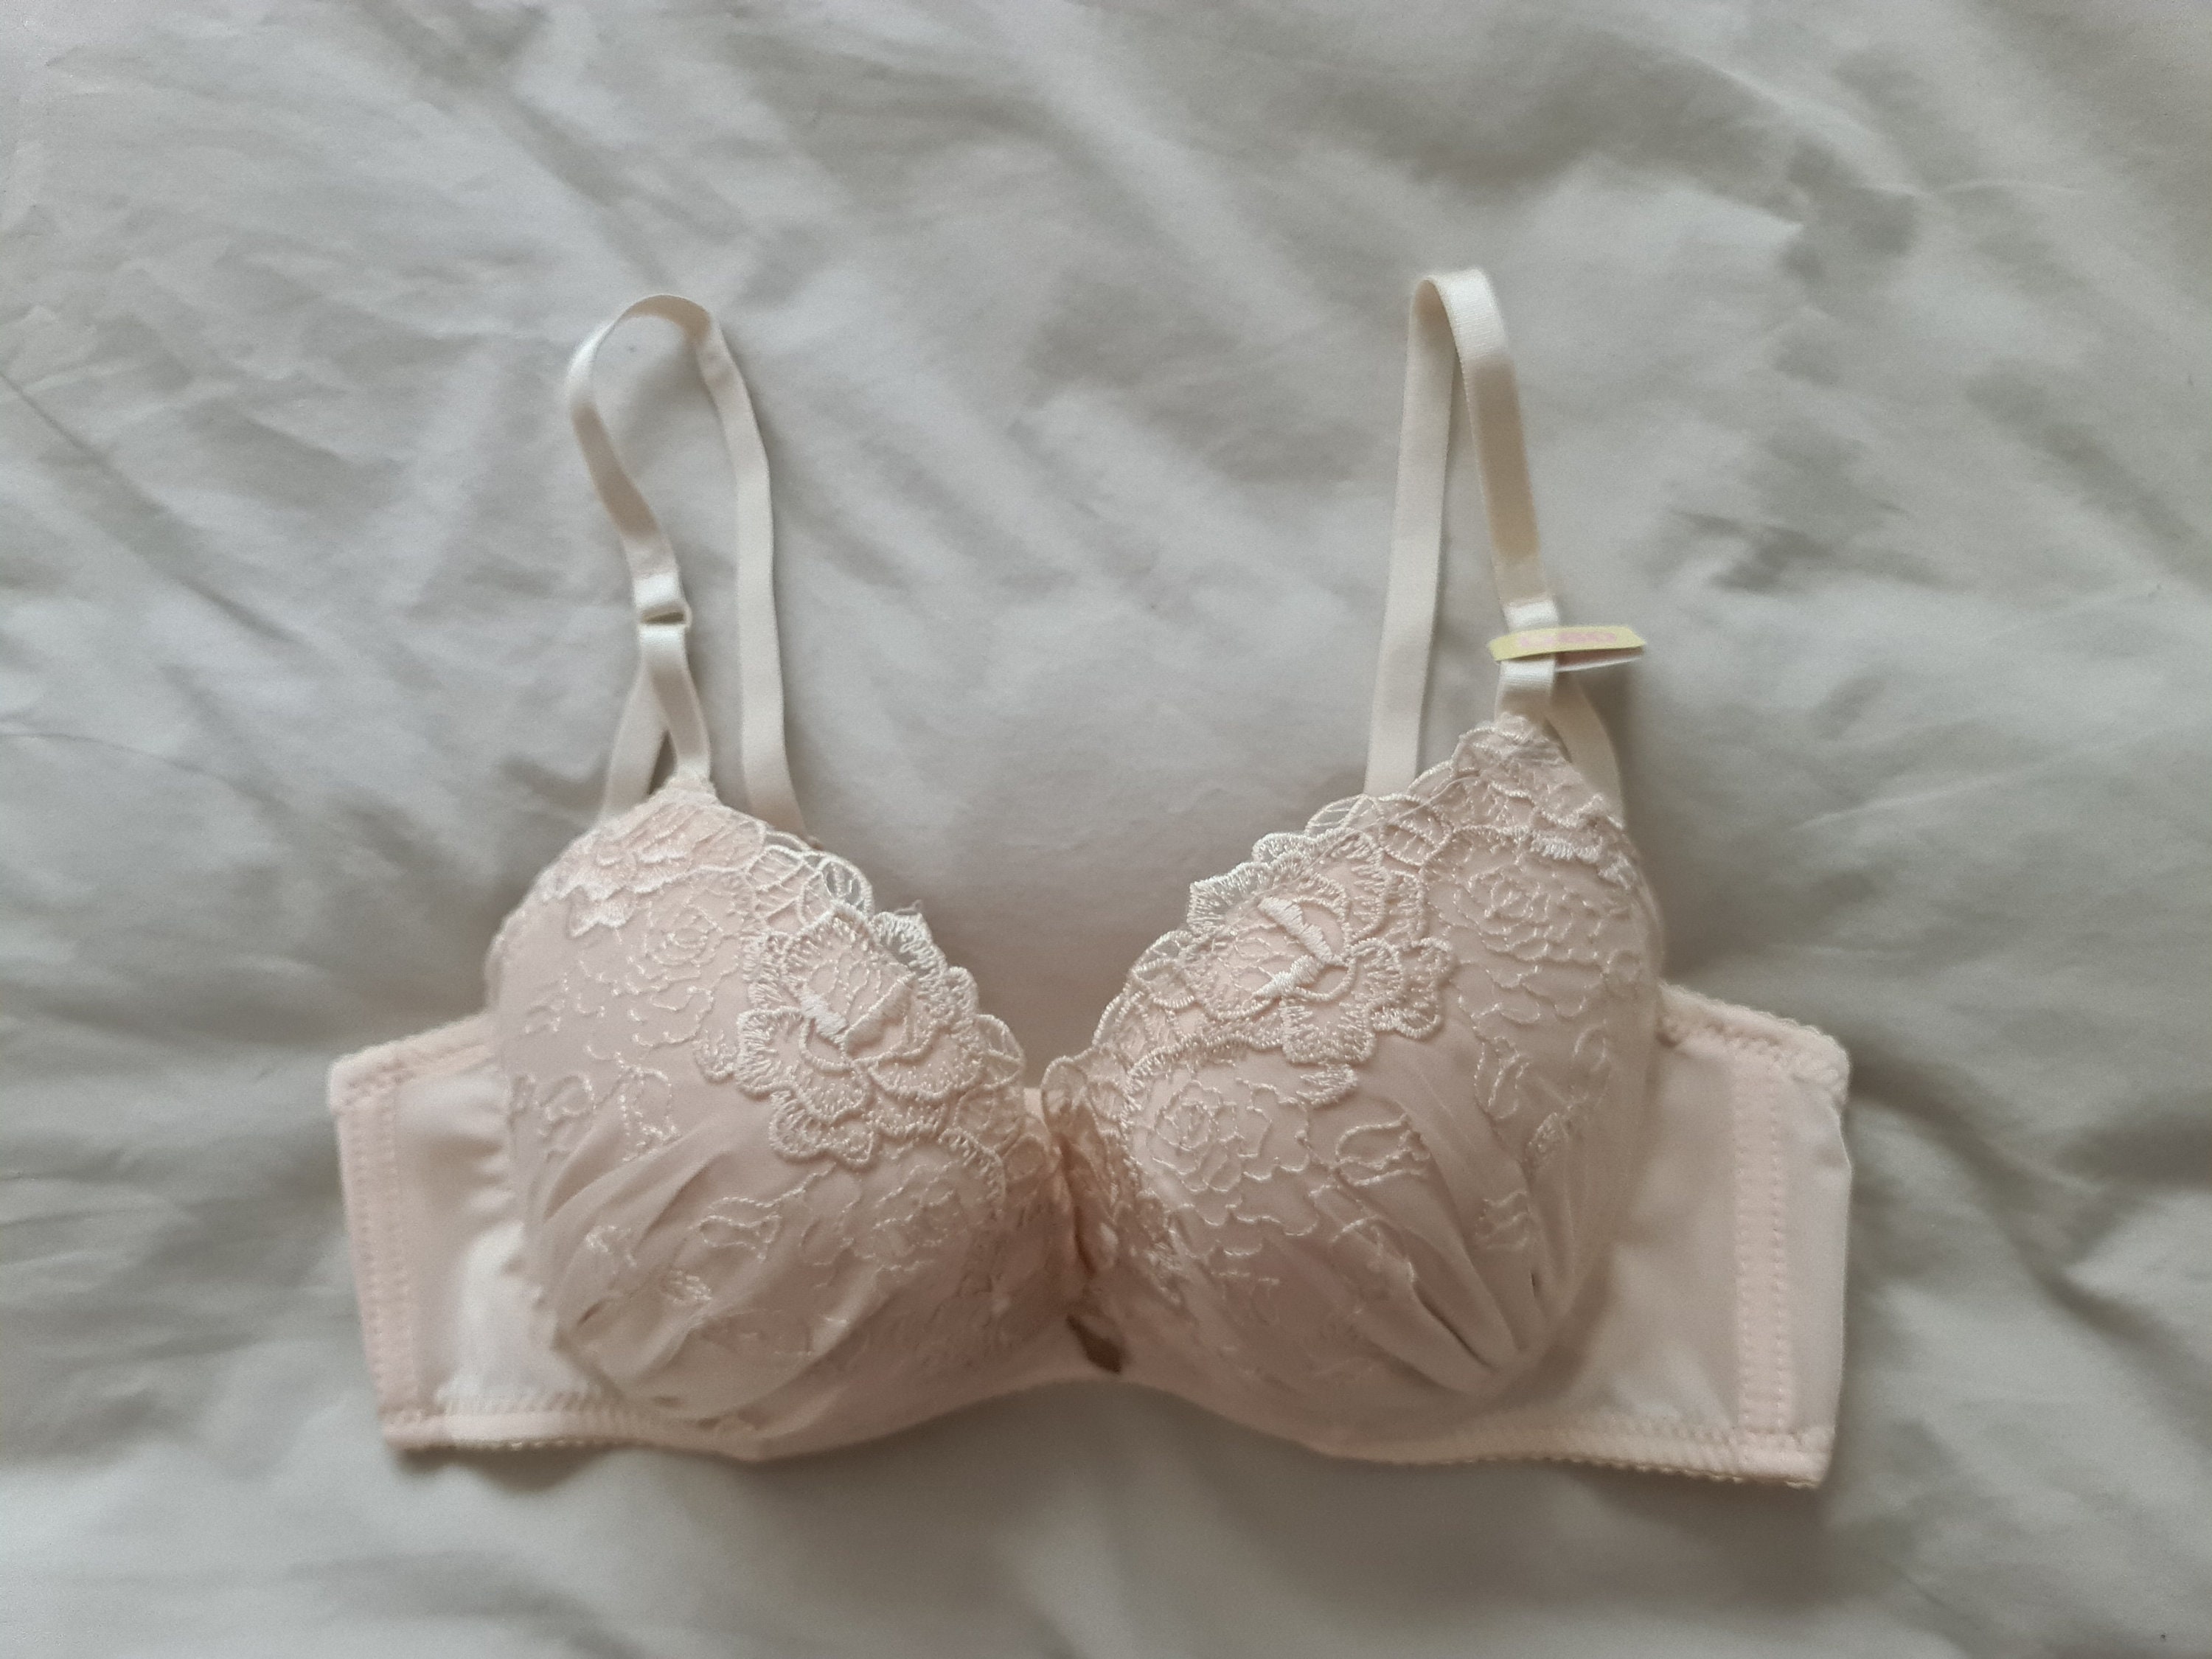 Vintage New Old Stock Bra From Japan size 14B Aus & 36B UK/US, Japan D80 